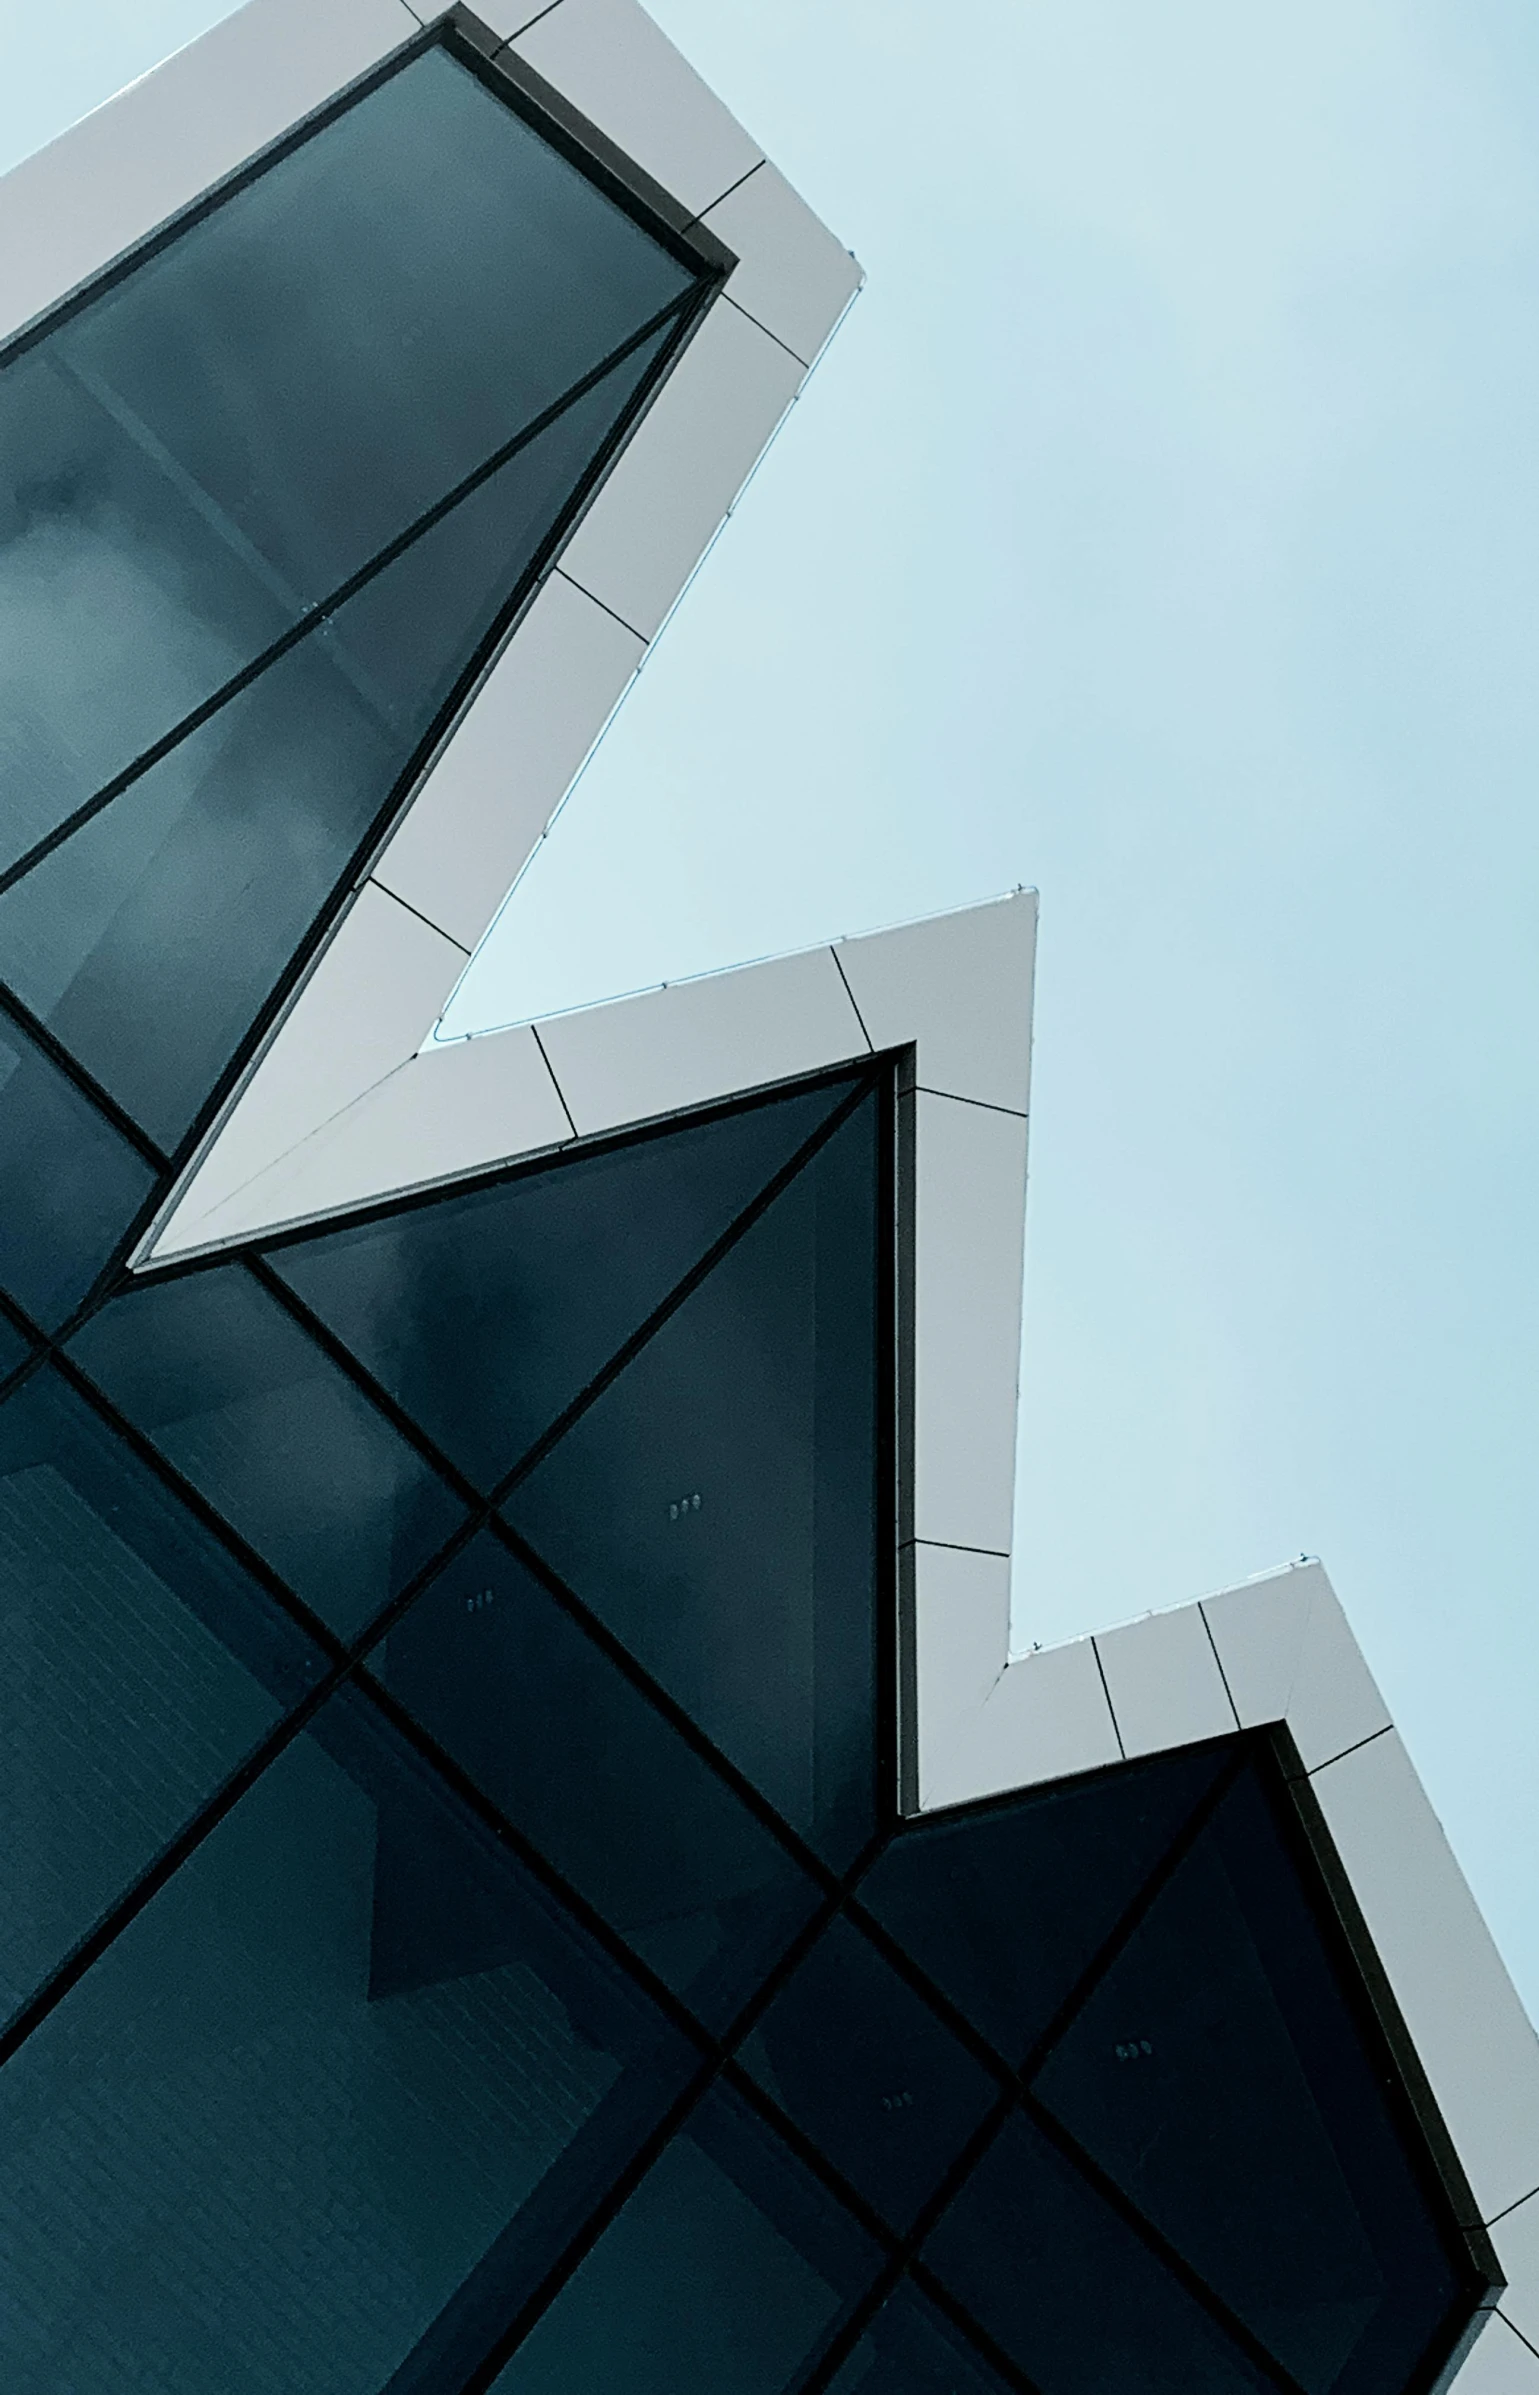 the triangular building is designed as an optical geometric object